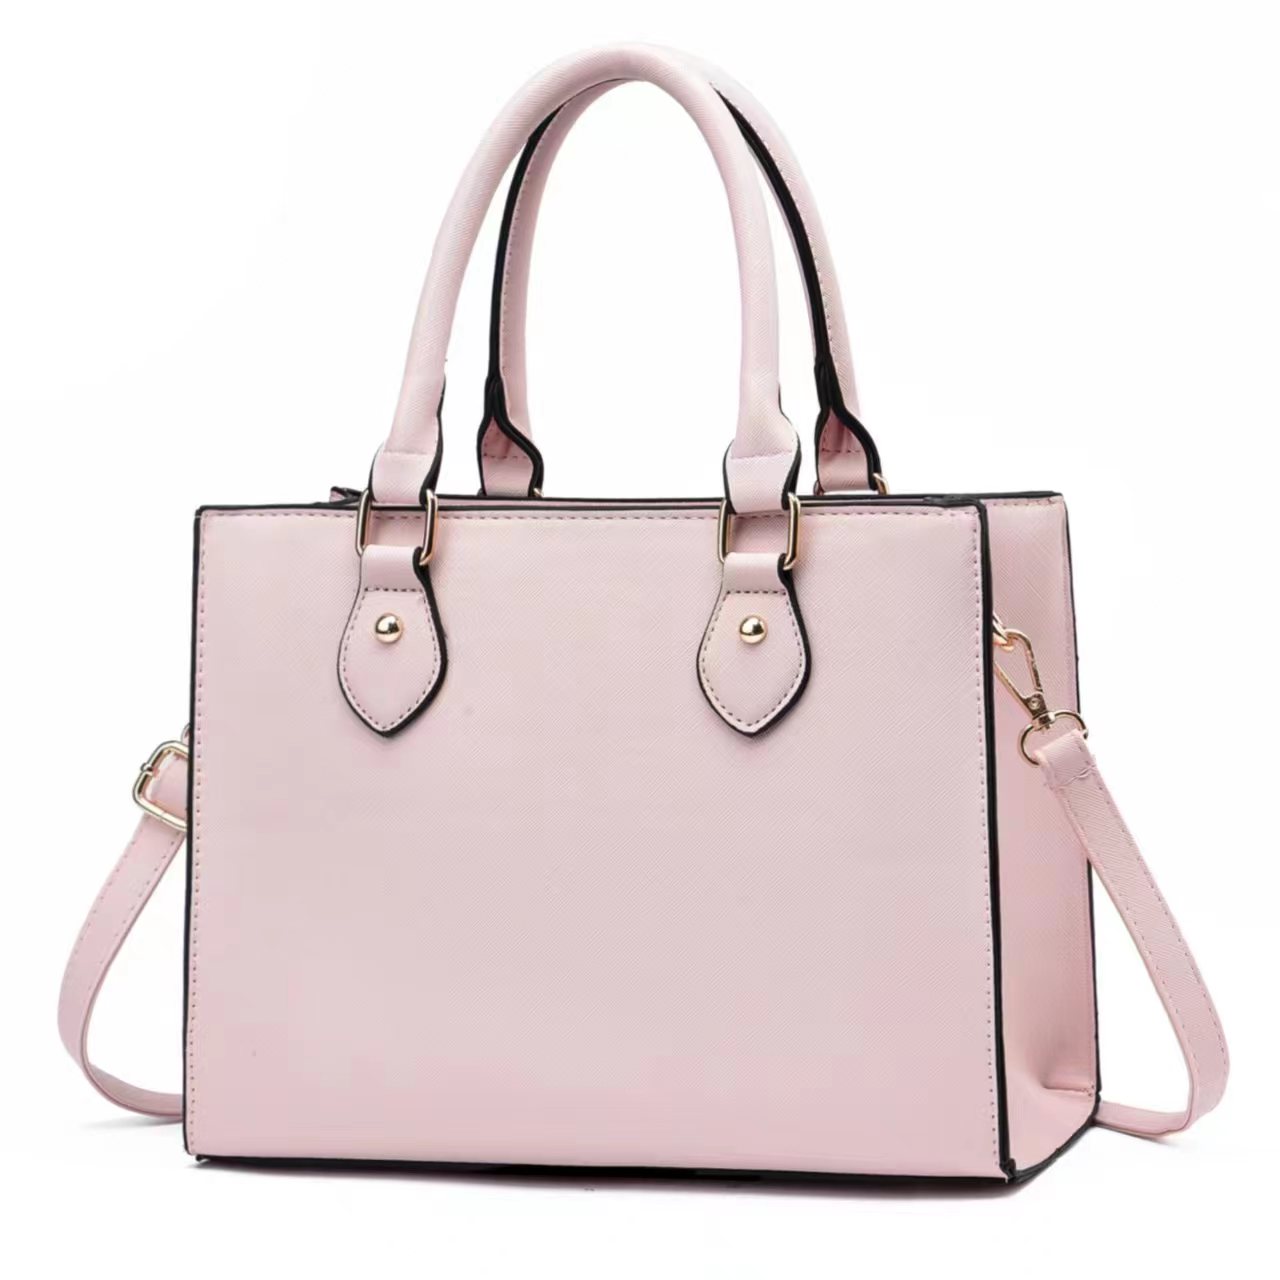 Large Capacity Shoulder Bag Women's PU Leather Handbag for Commuting and  Casual Use, Versatile Tote Bag